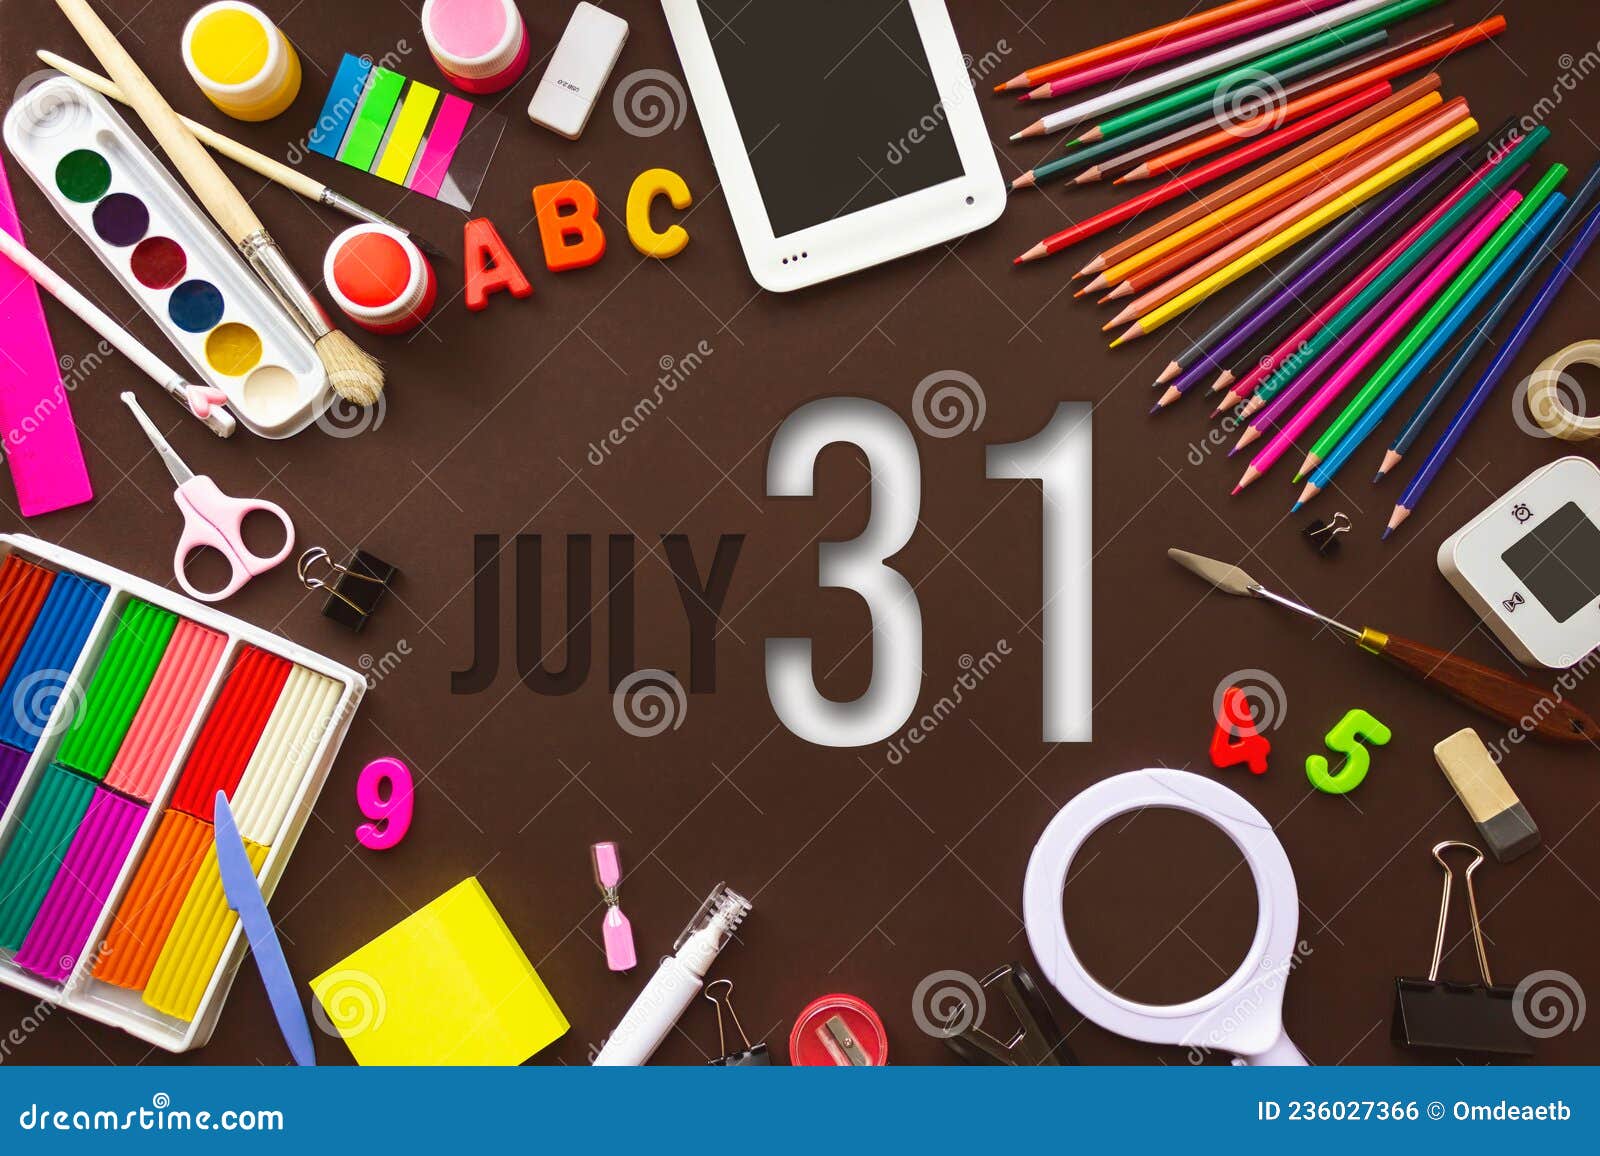 july-31st-day-31-of-month-calendar-date-school-notebook-and-various